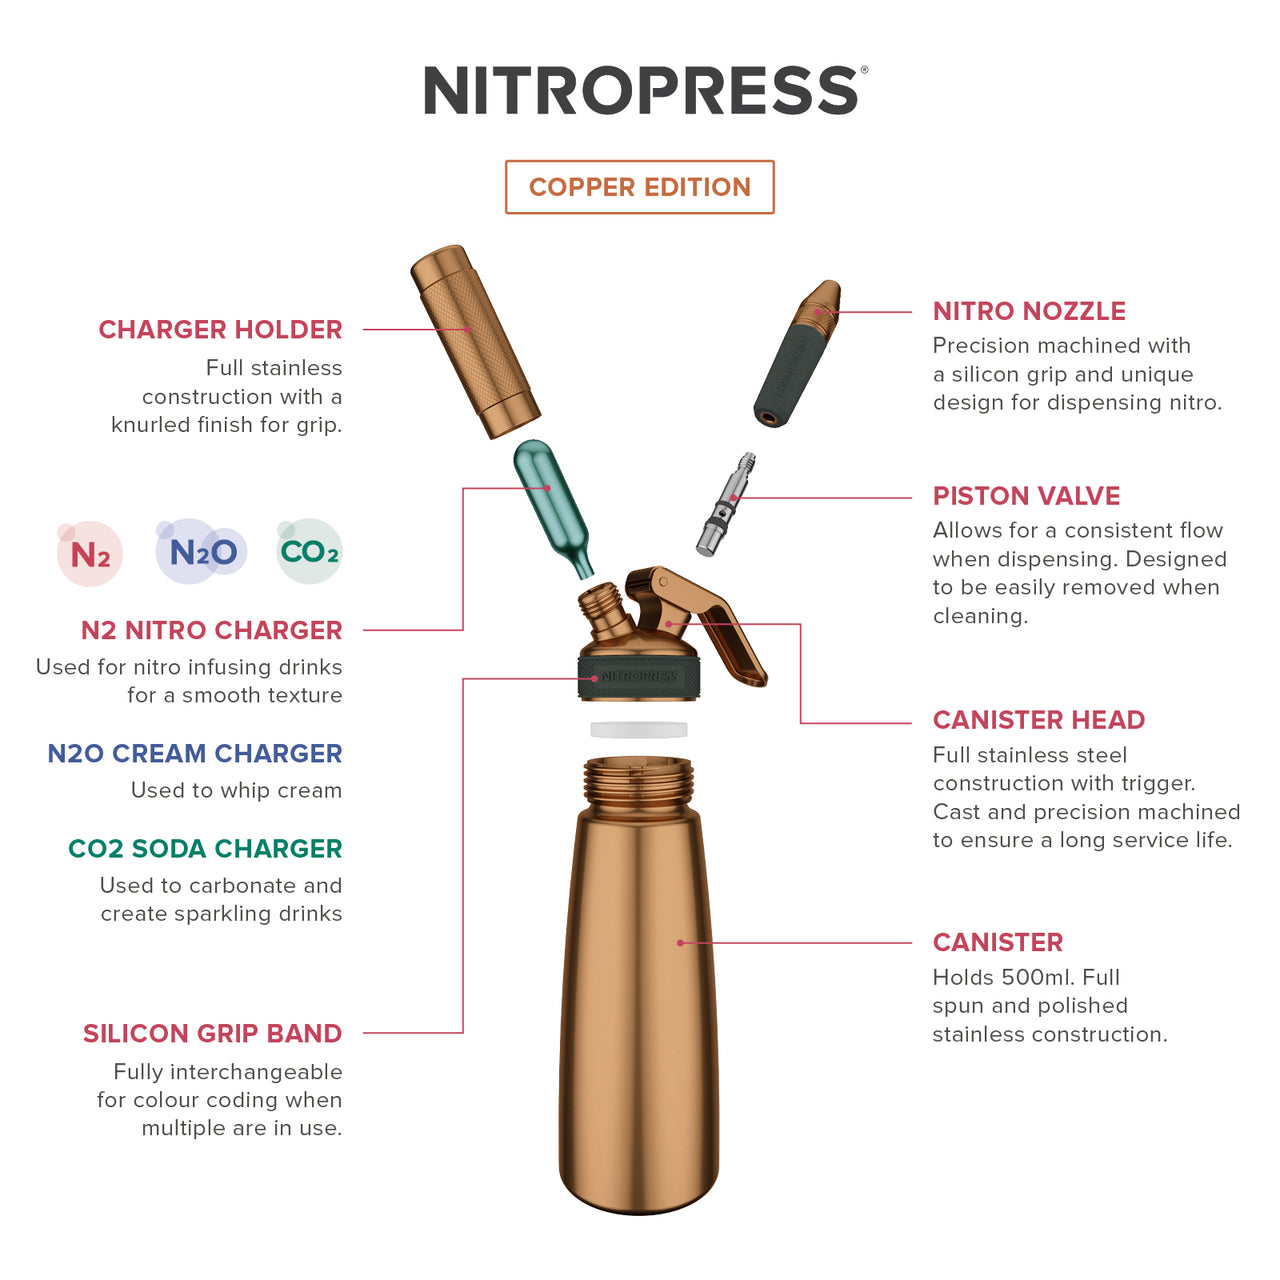 Technical diagram showing how a copper nitropress works